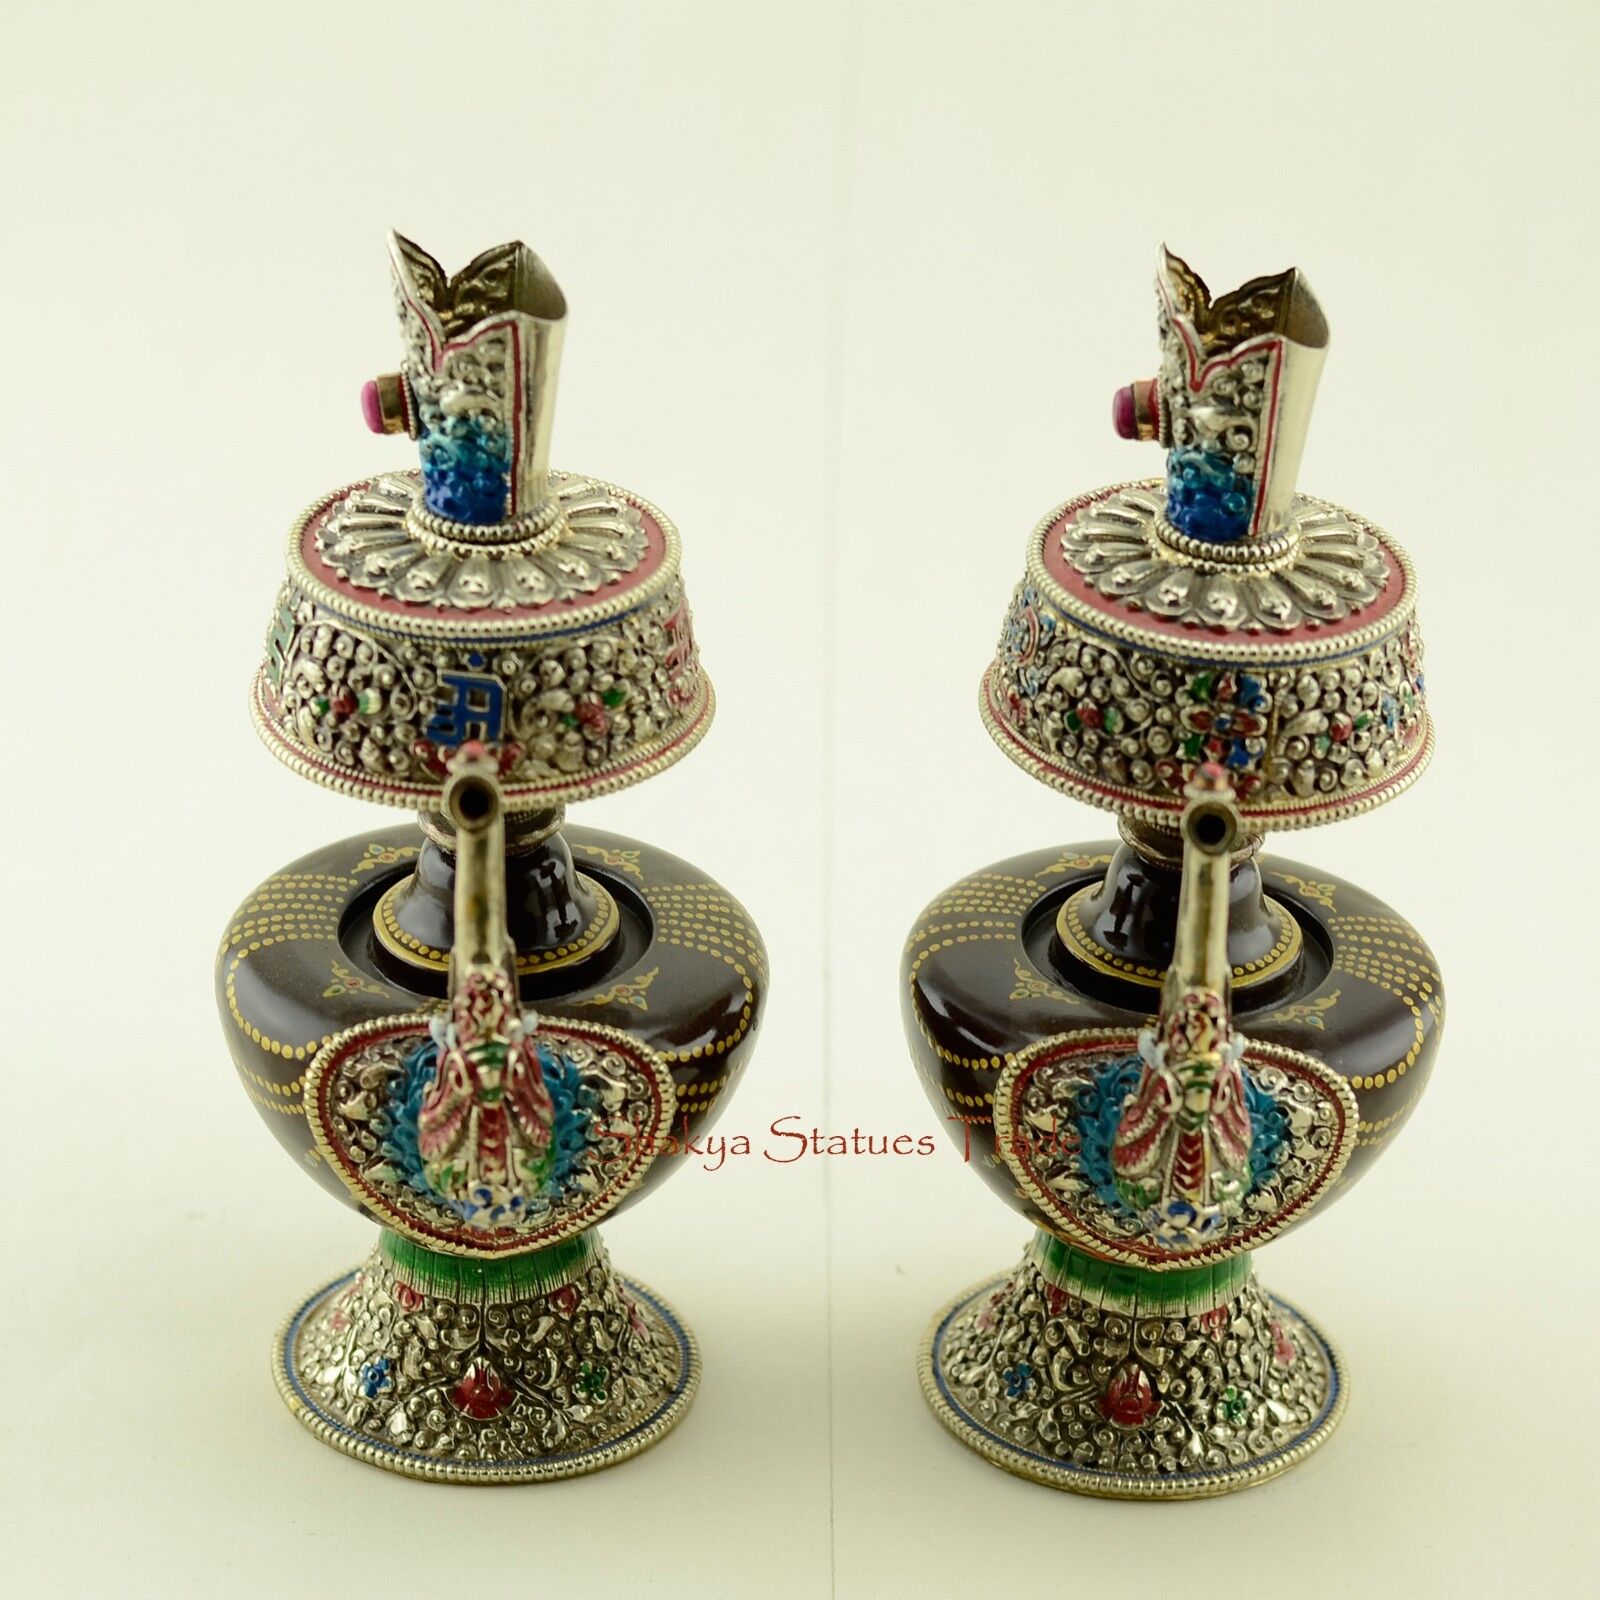 Tibetan Buddhism Colored Copper Alloy Sacred Vase Bhumpa Set from Patan, Nepal